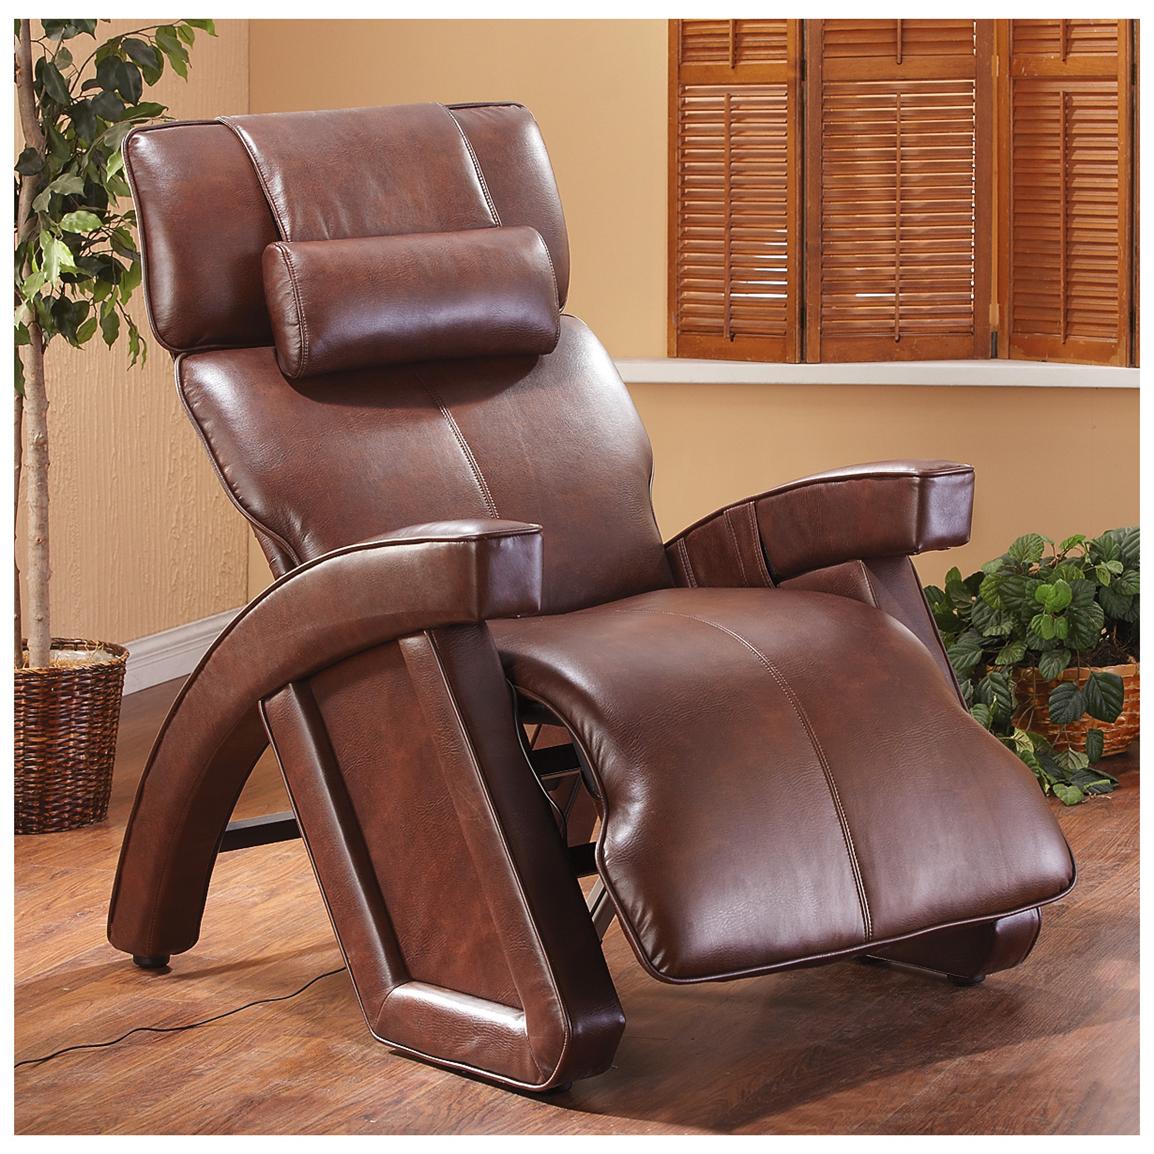 Reclining Massage Chair - 299927, Massage Chairs & Tables at Sportsman